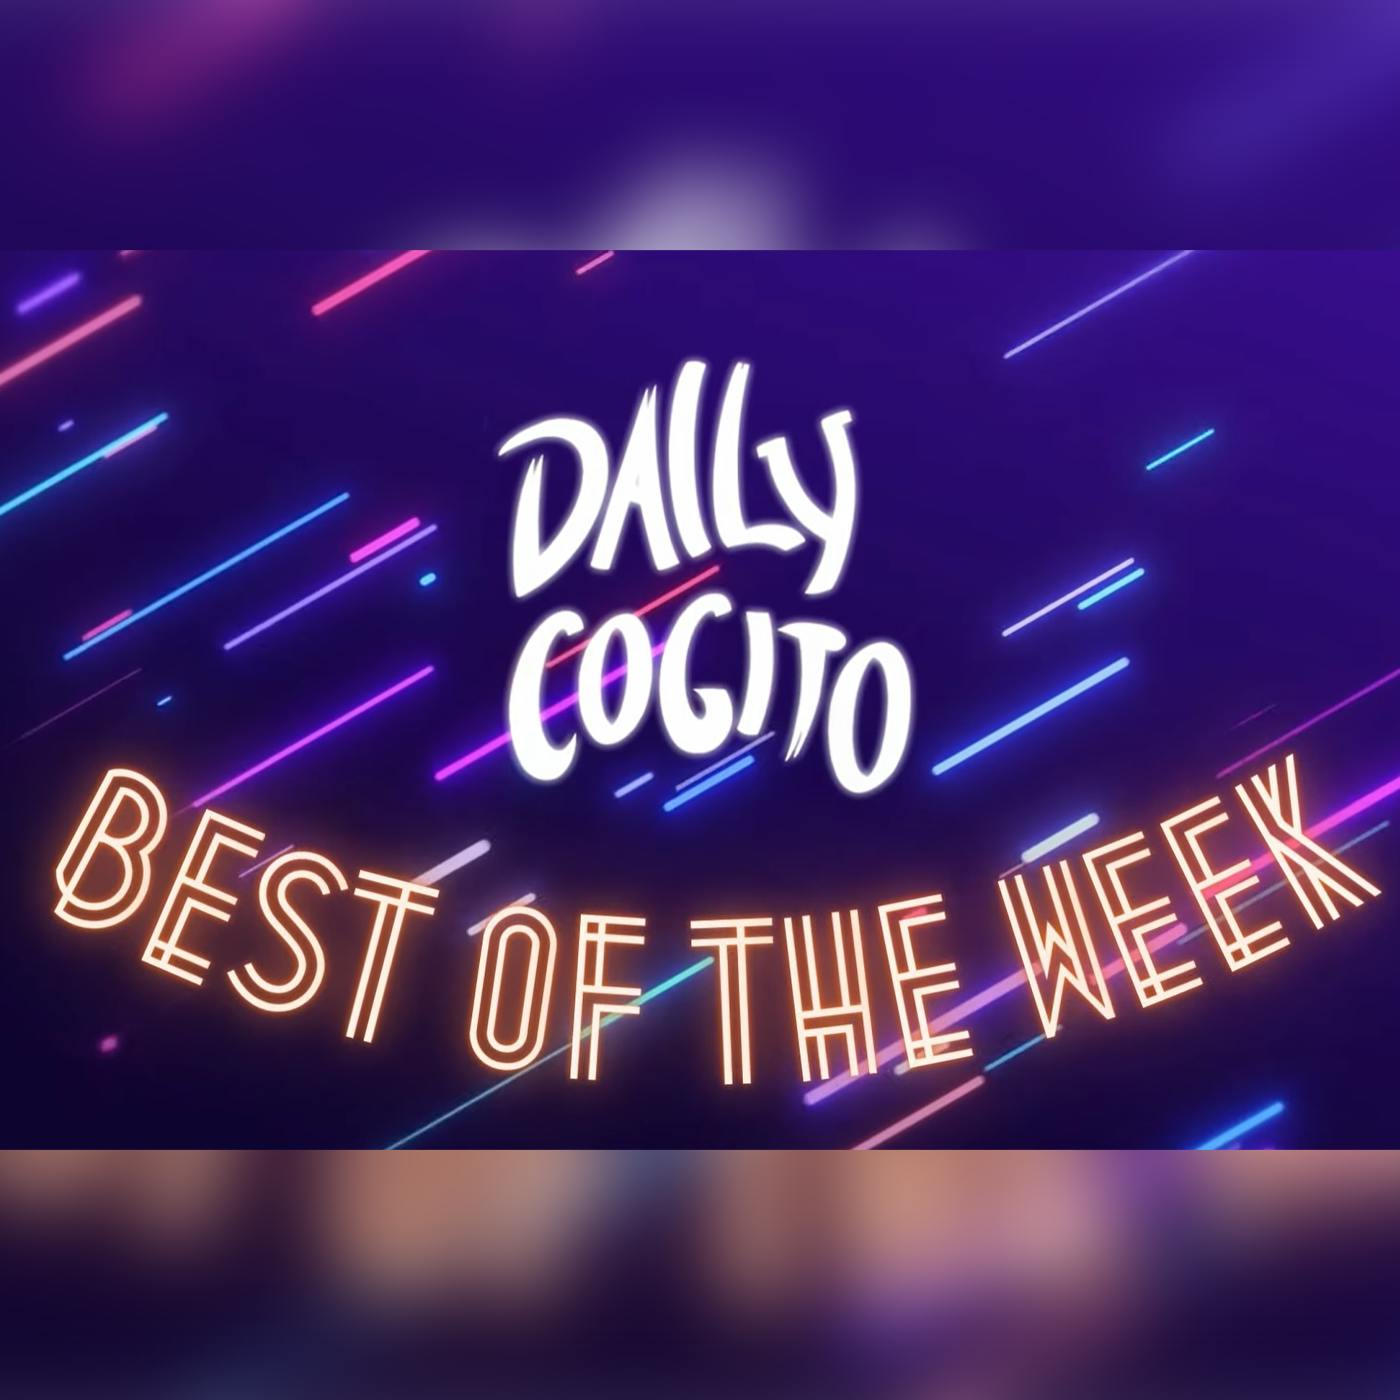 Daily Cogito Best of the Week - 16 gennaio